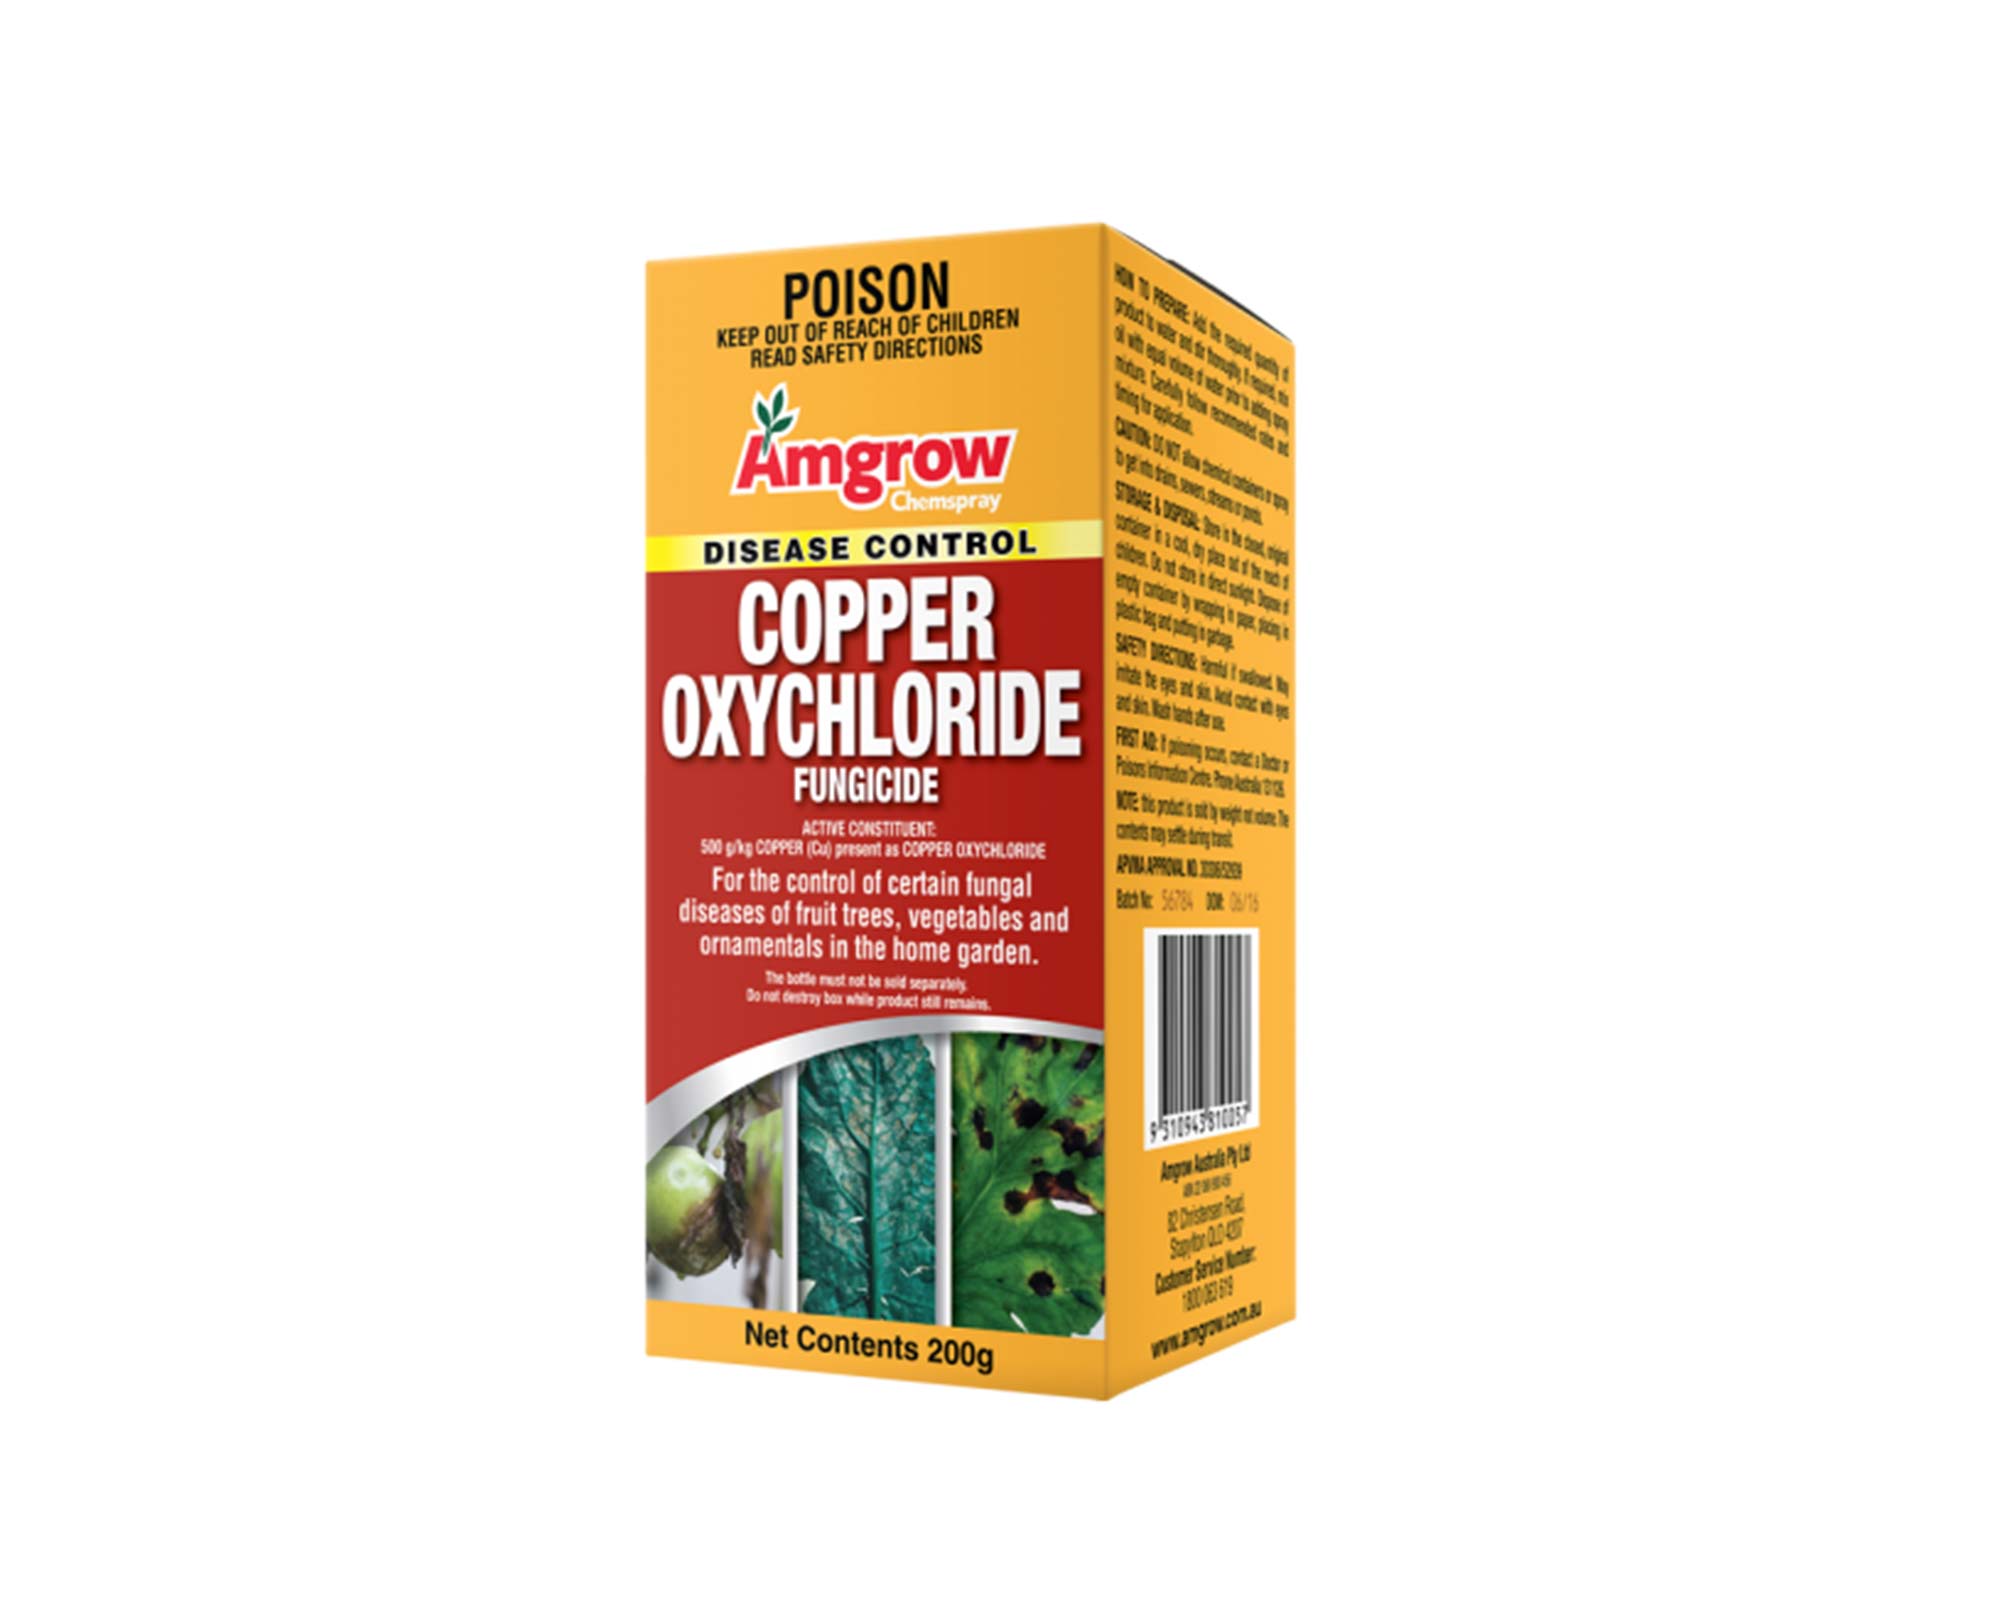 Copper oxychloride fungicide - Amgrow